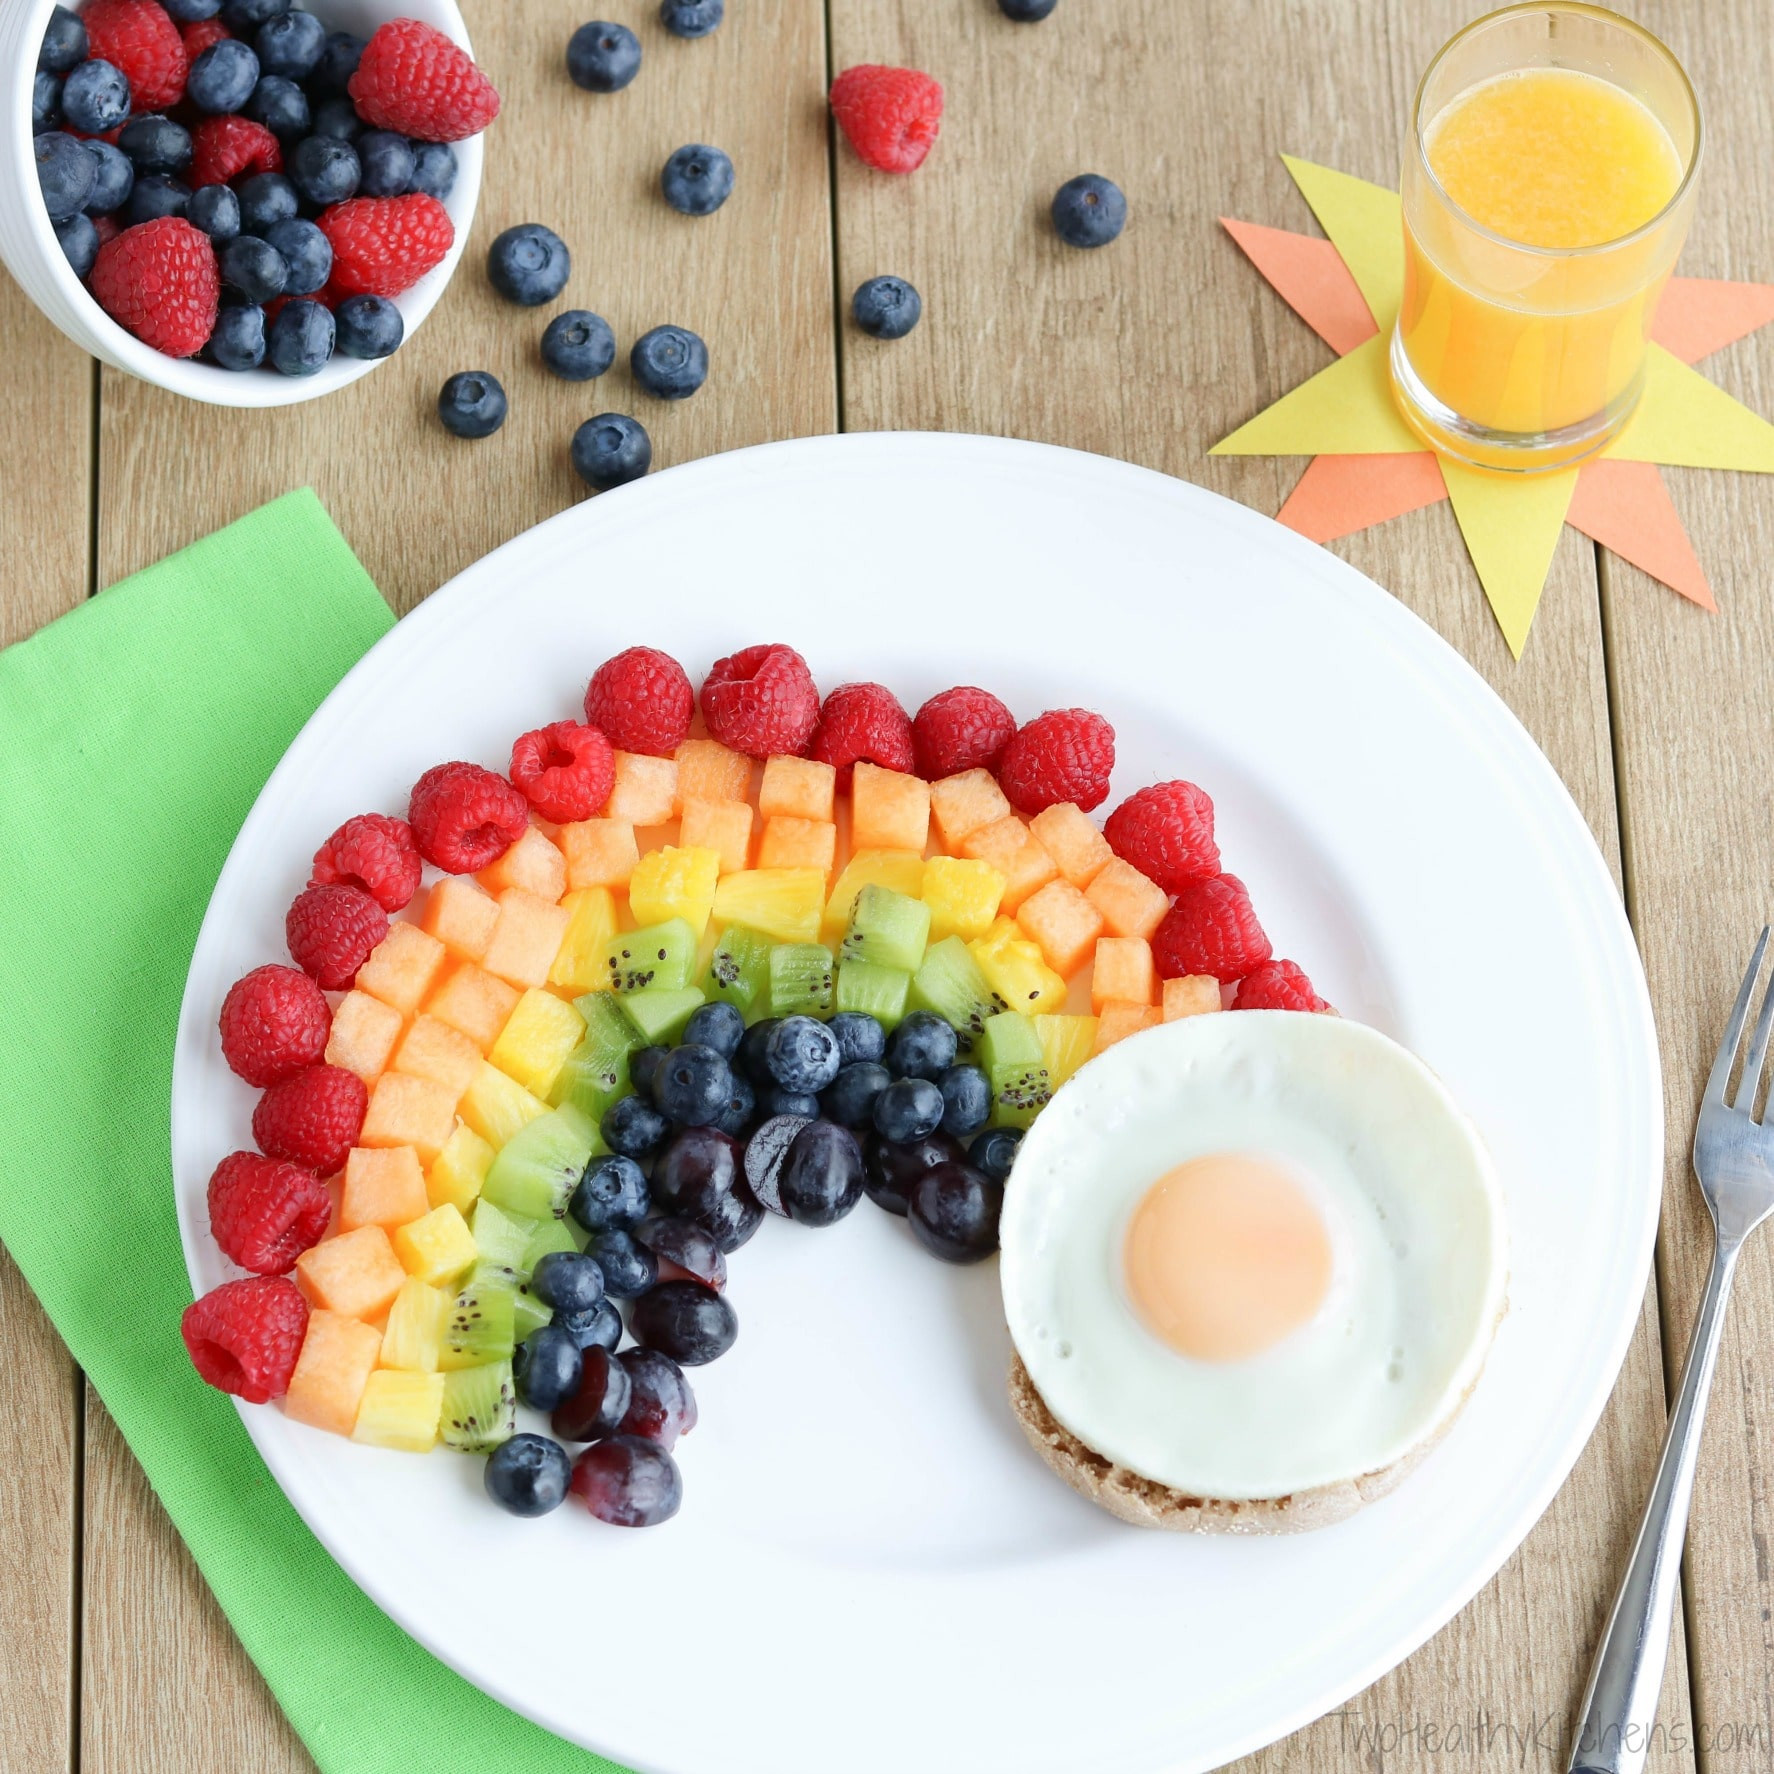 Breakfast Food for Kids Inspirational Fruit Rainbow with A Pot Of Gold Fun Breakfast Idea for